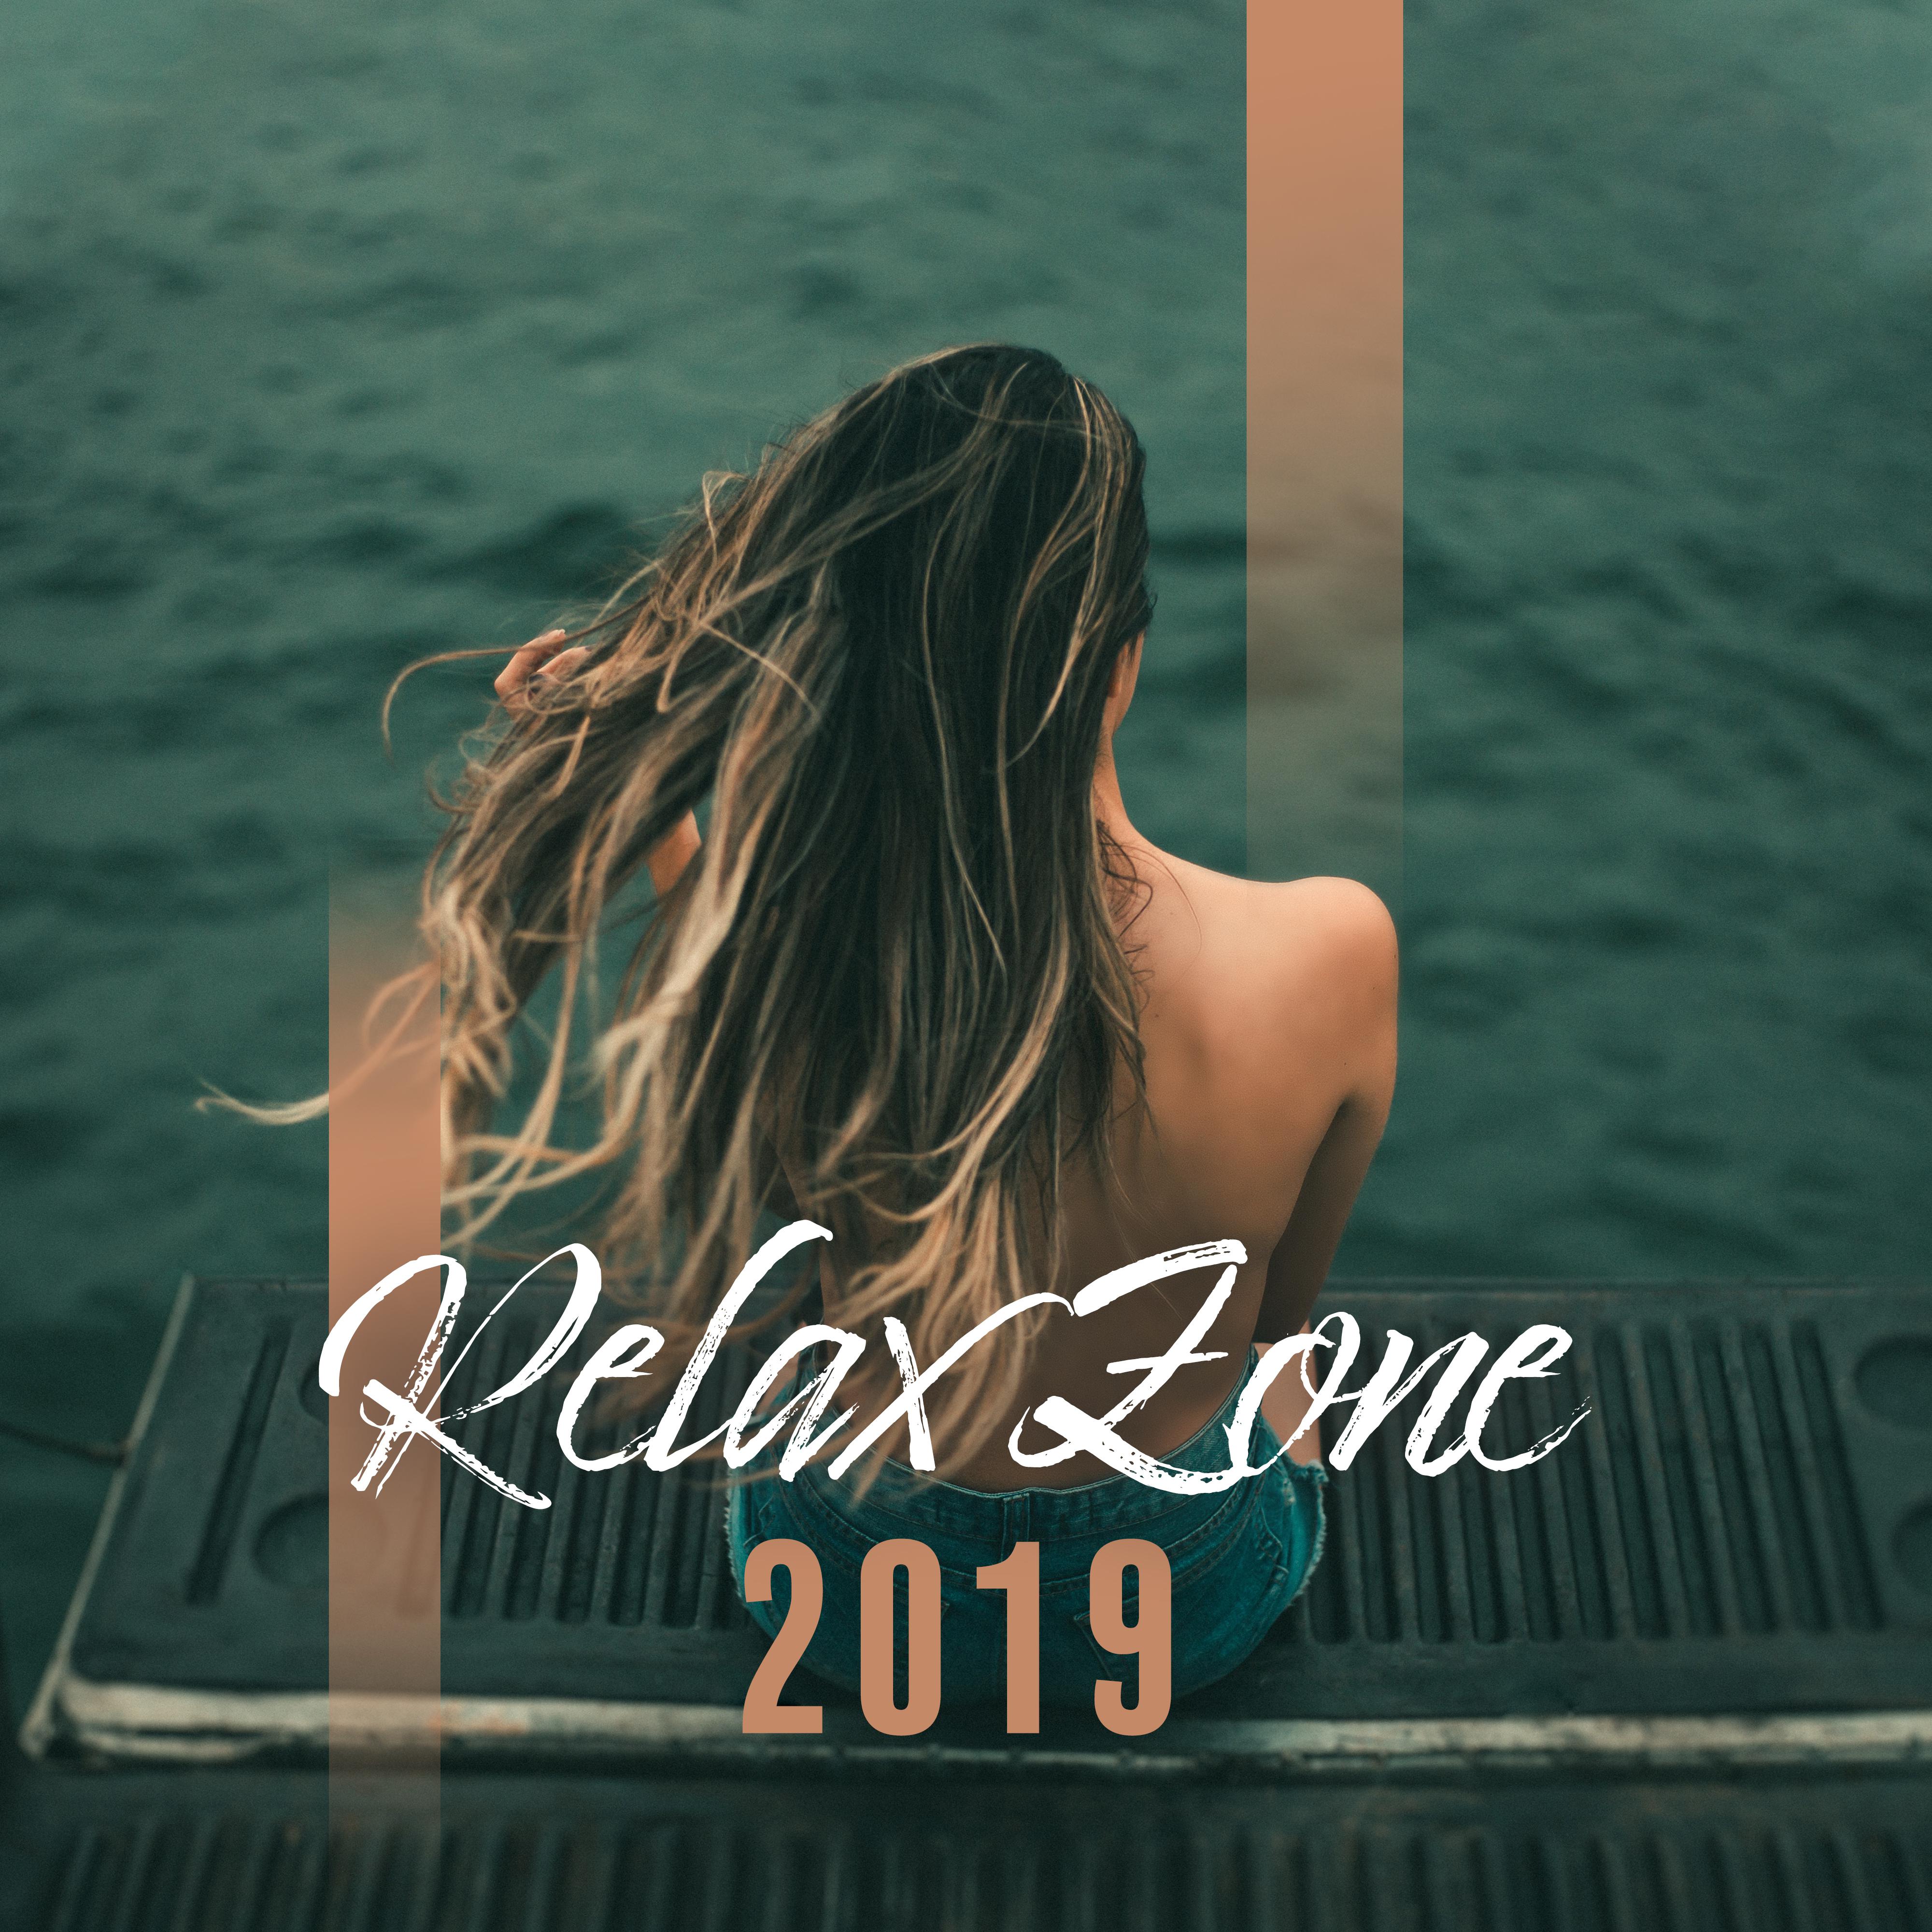 Relax Zone 2019  Deep Relax, Chill Out 2019